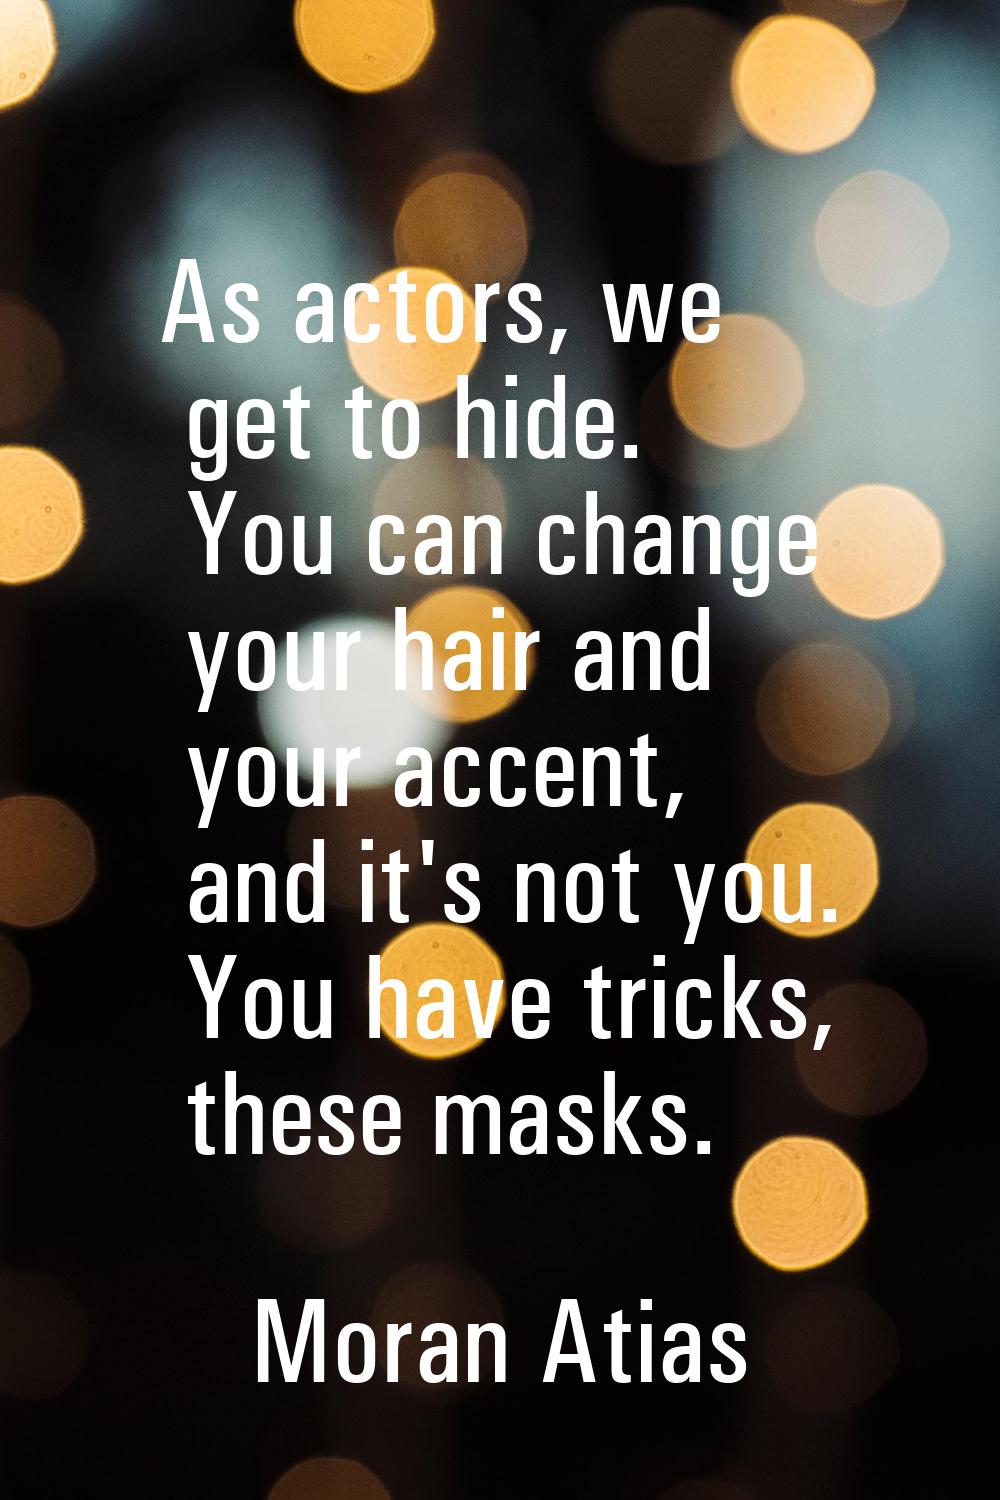 As actors, we get to hide. You can change your hair and your accent, and it's not you. You have tri